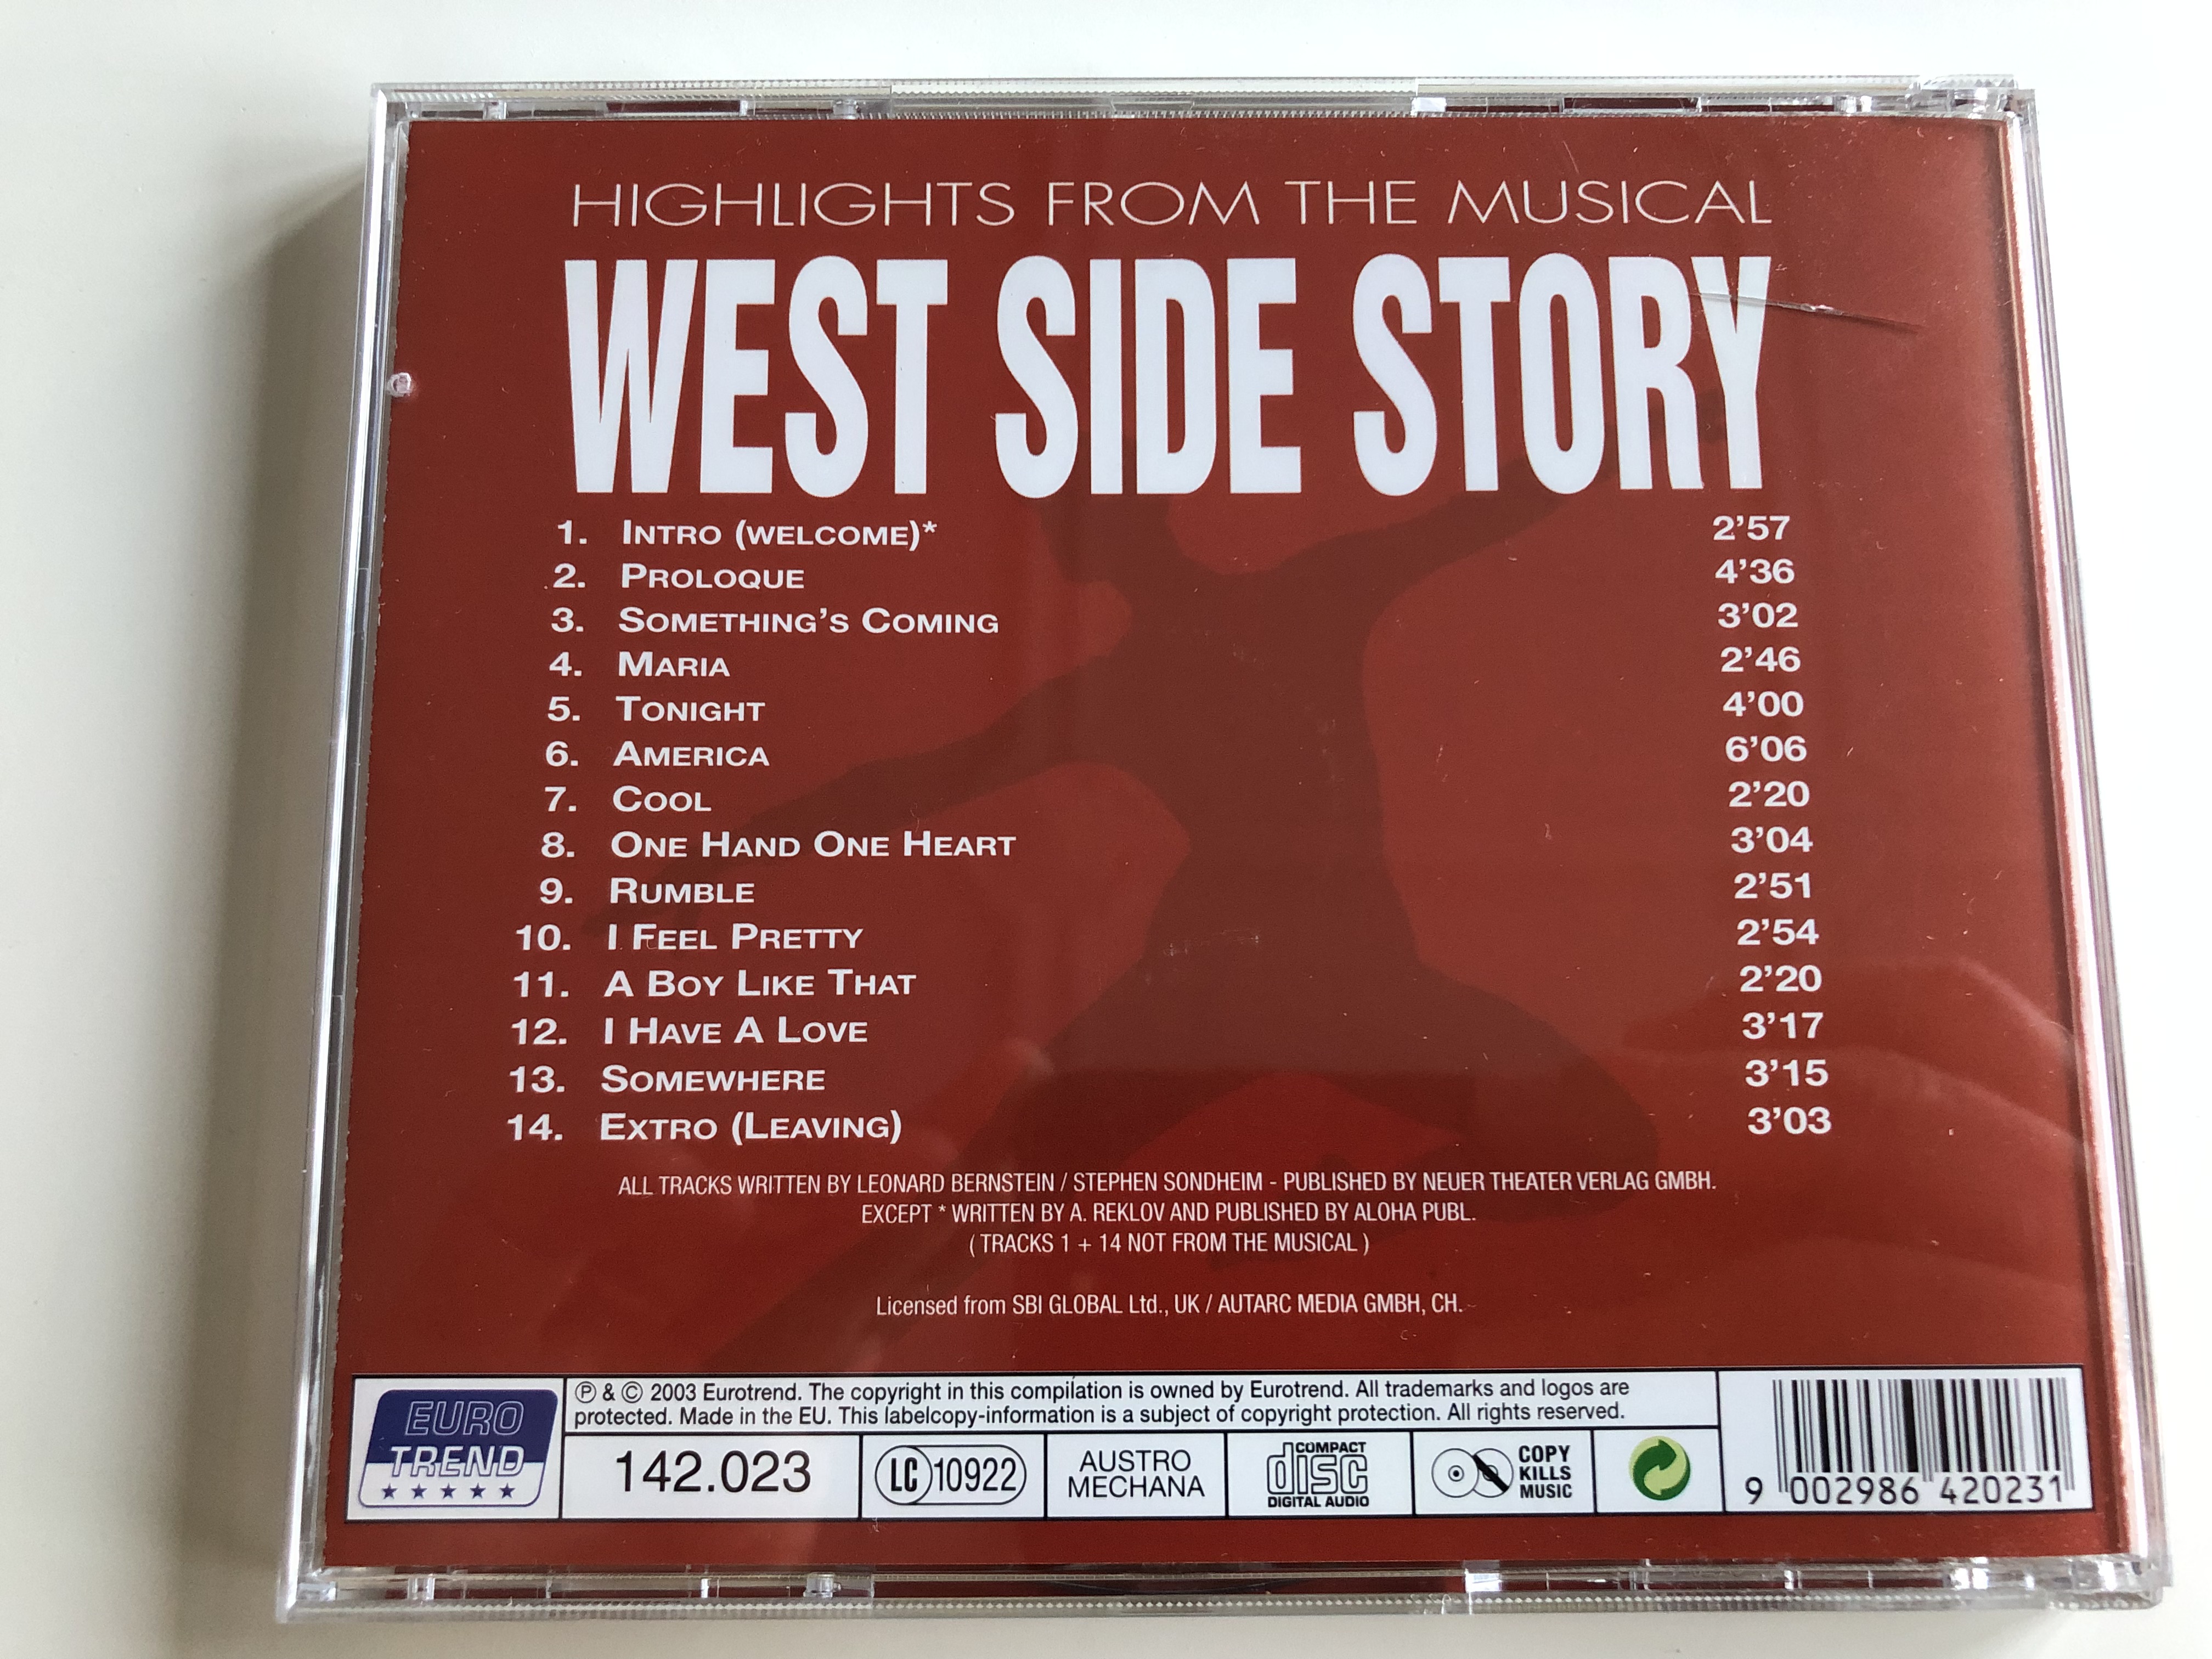 west-side-story-highlights-from-the-musical-something-s-coming-maria-tonight-america-cool-rumble-audio-cd-2003-142.023-lc10922-3-.jpg